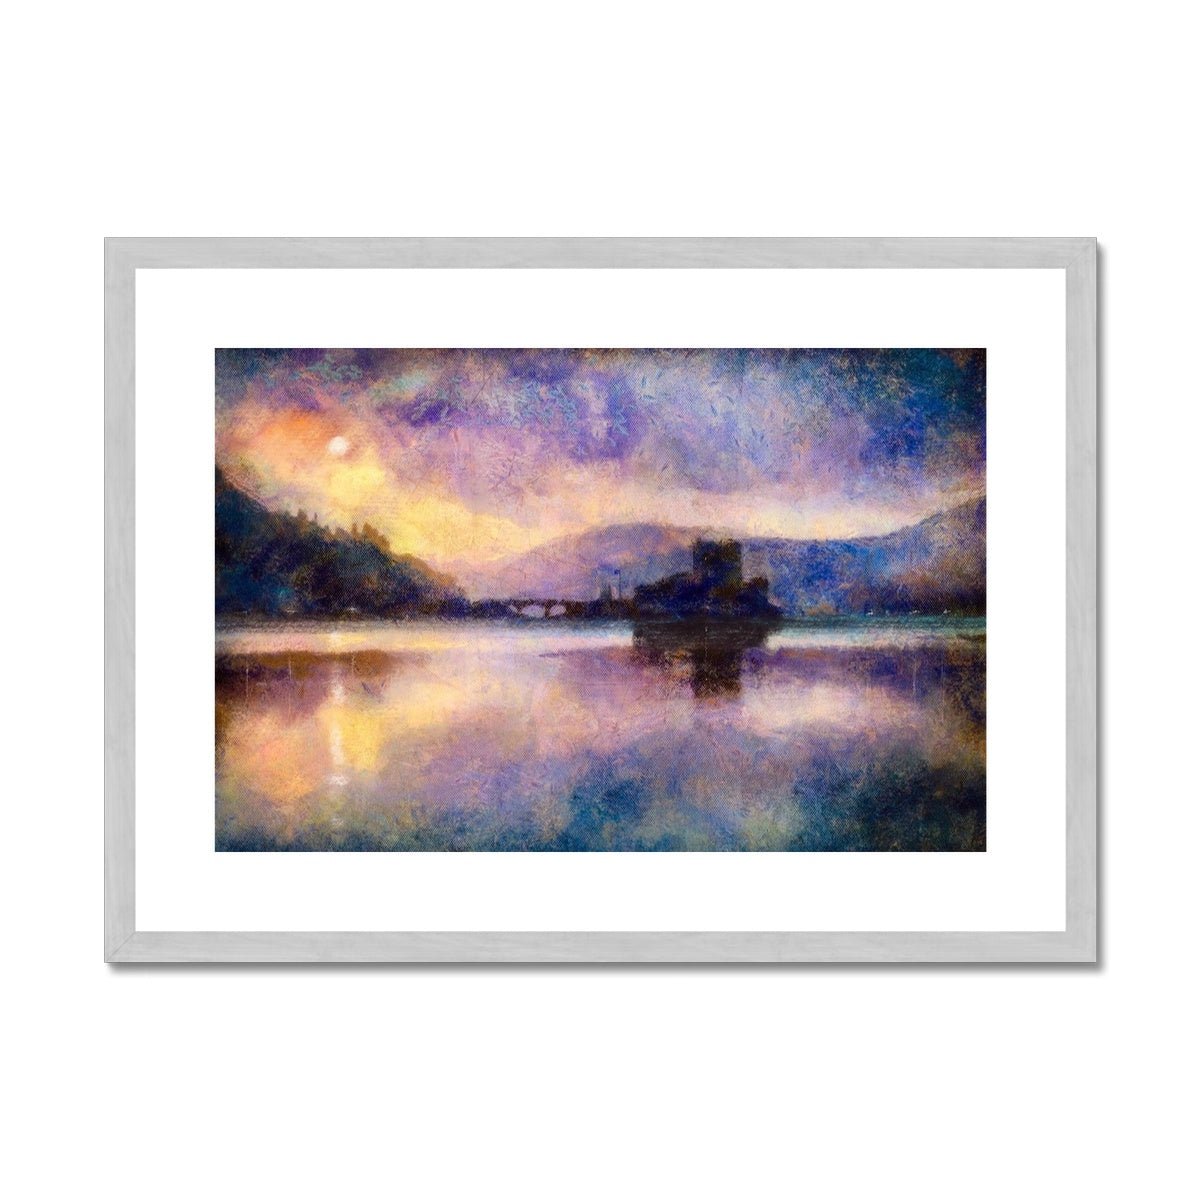 Eilean Donan Castle Moonlight Painting | Antique Framed & Mounted Prints From Scotland-Antique Framed & Mounted Prints-Historic & Iconic Scotland Art Gallery-A2 Landscape-Silver Frame-Paintings, Prints, Homeware, Art Gifts From Scotland By Scottish Artist Kevin Hunter